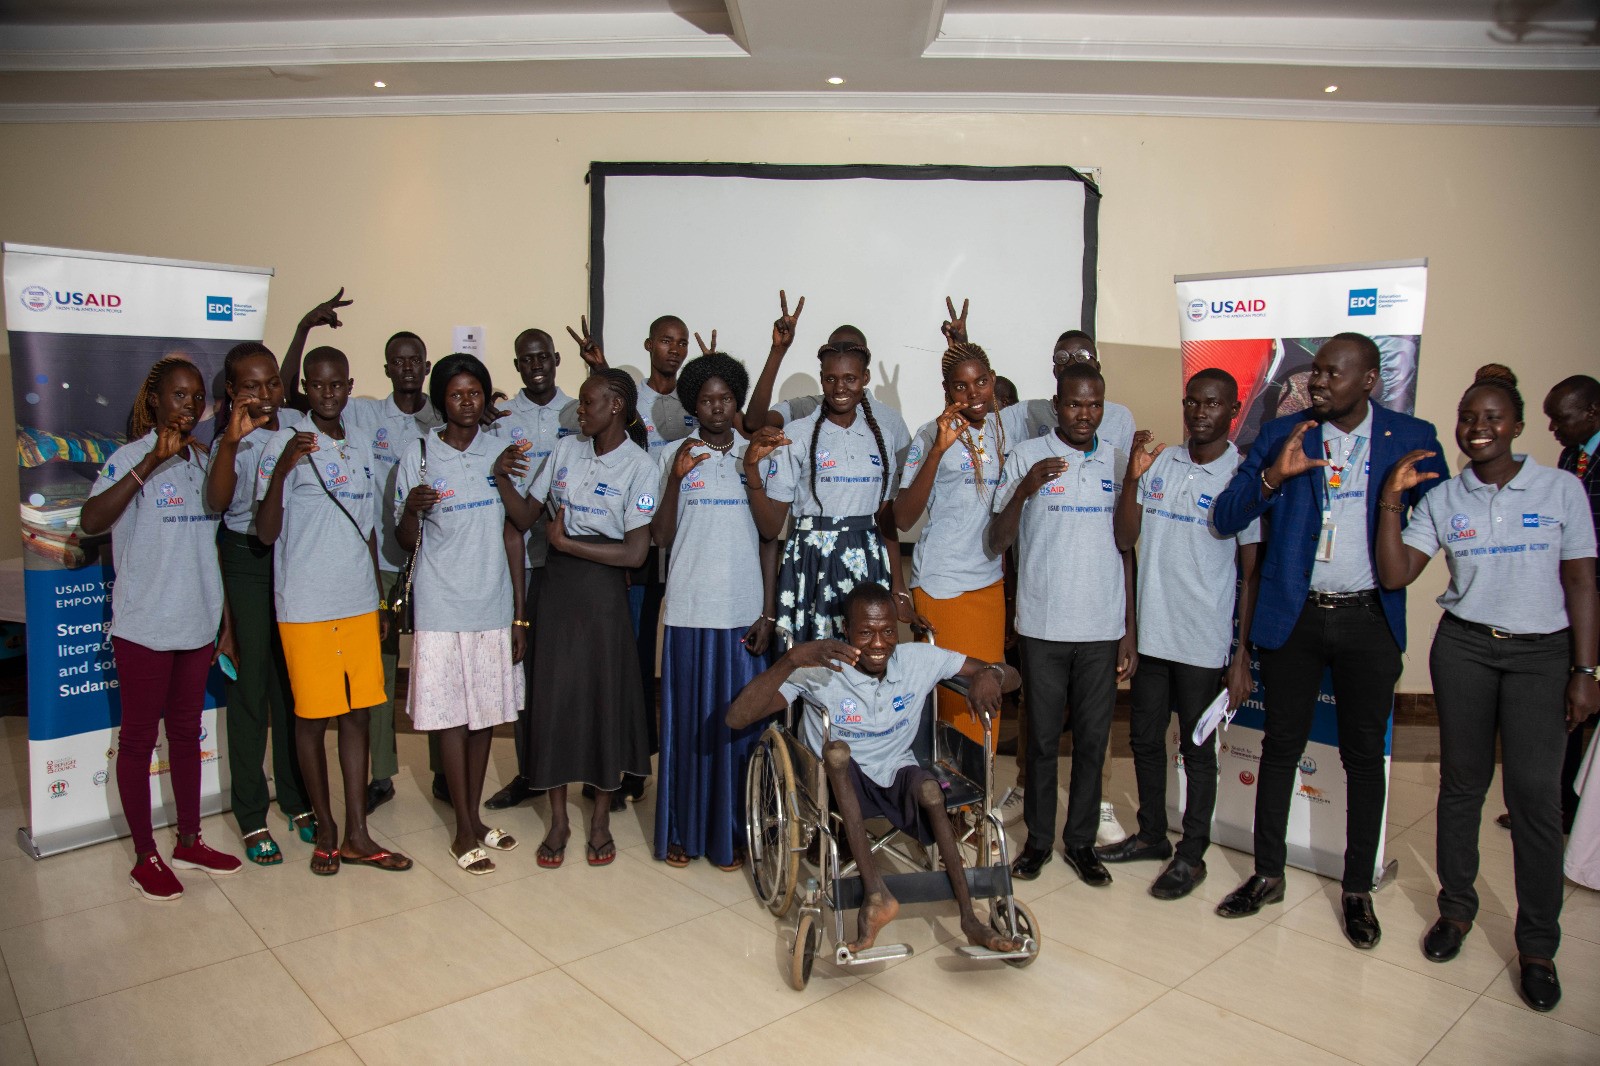 USAID Youth Empowerment Activity equips 6,000 rural youth with life skills